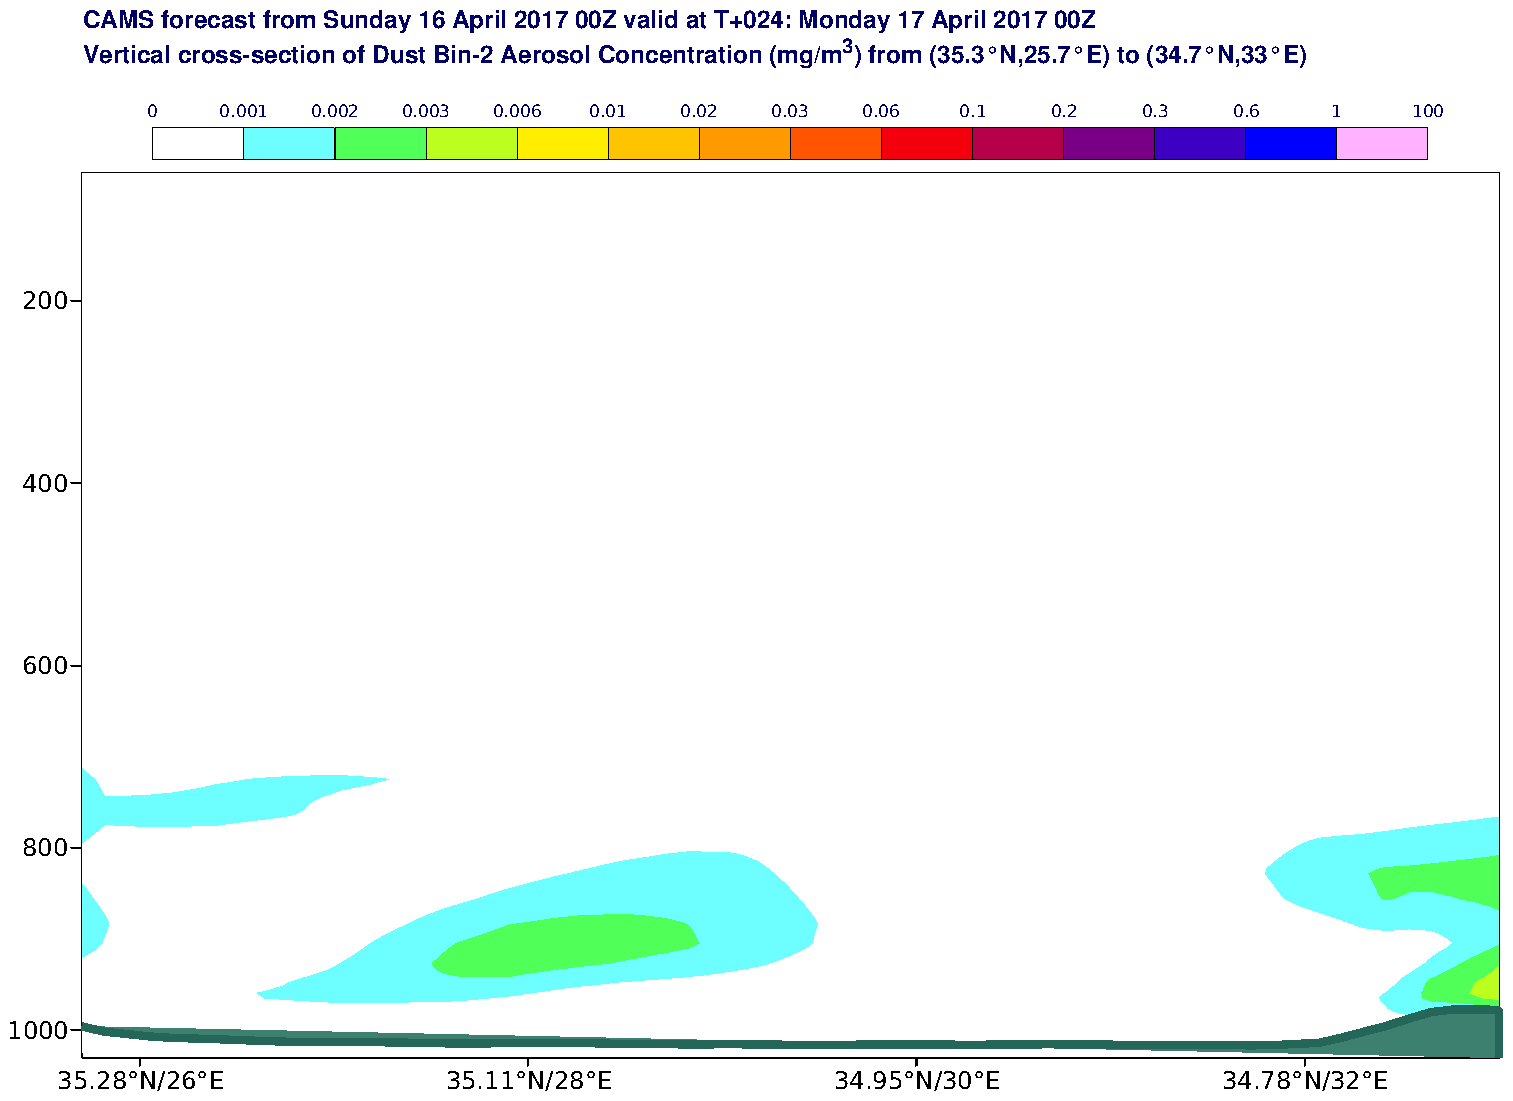 Vertical cross-section of Dust Bin-2 Aerosol Concentration (mg/m3) valid at T24 - 2017-04-17 00:00